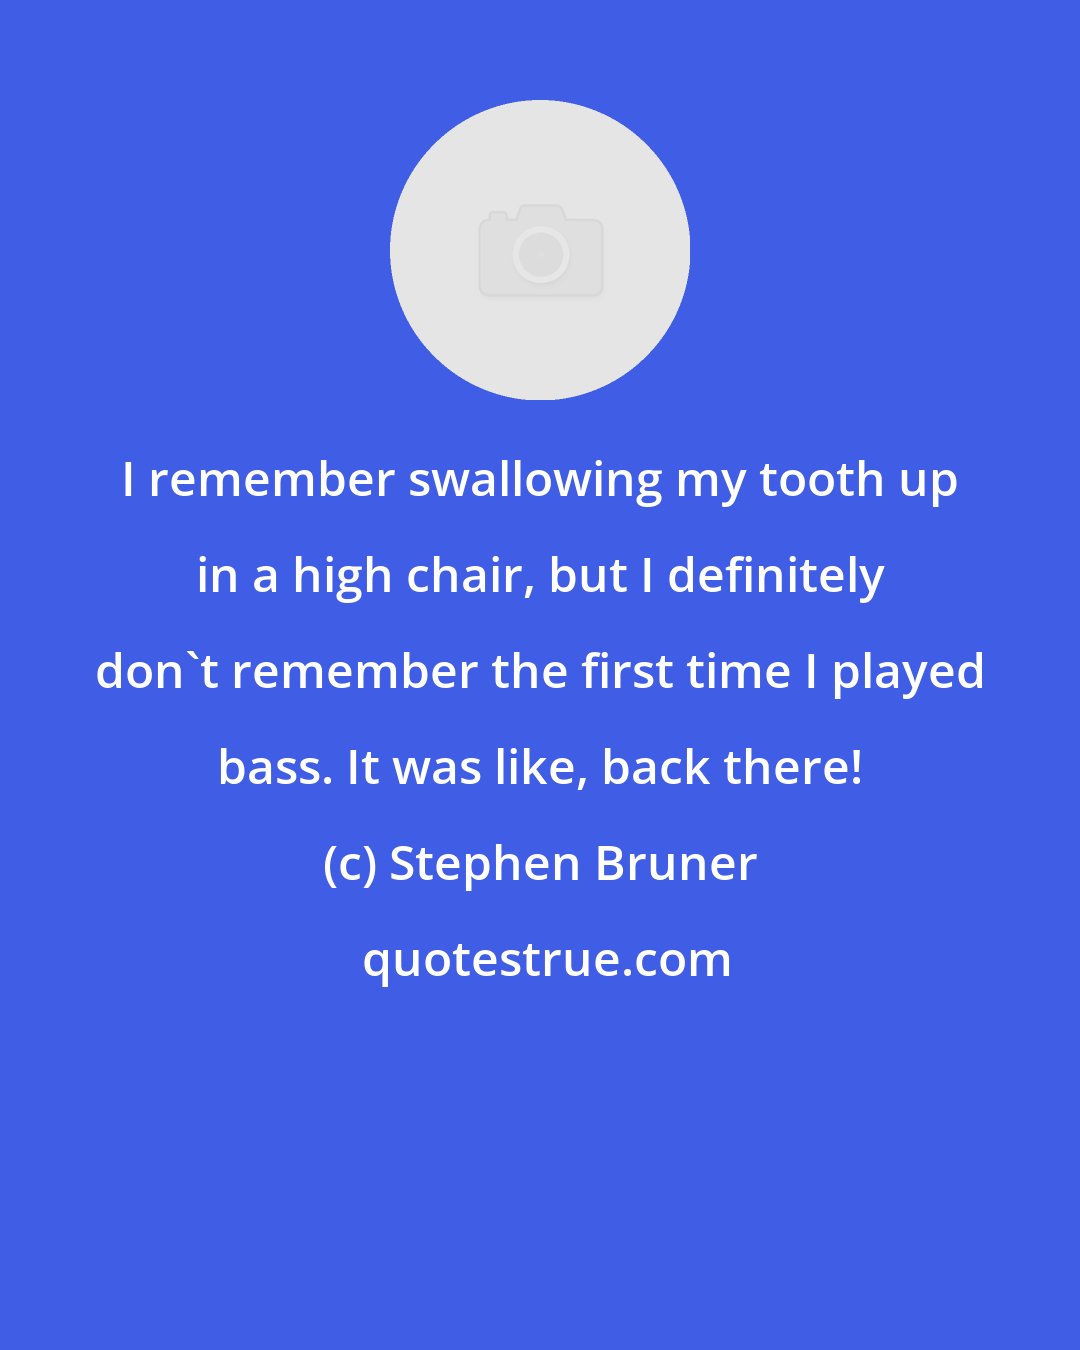 Stephen Bruner: I remember swallowing my tooth up in a high chair, but I definitely don't remember the first time I played bass. It was like, back there!